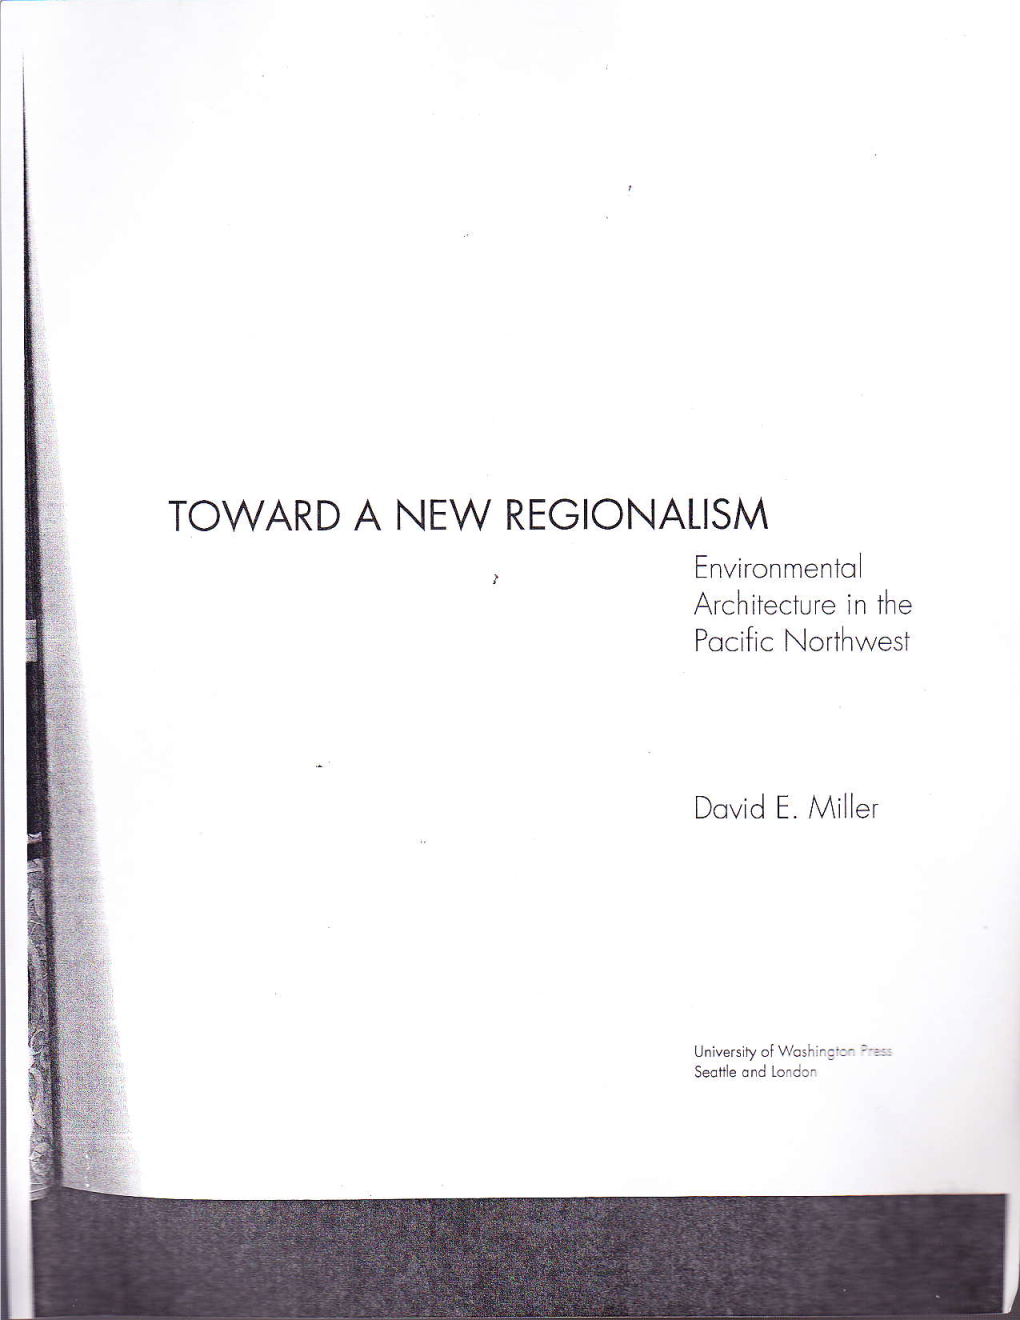 TOWARD a NEW REGIONALISM Environmentol Archilecture in the Pocific Northwest